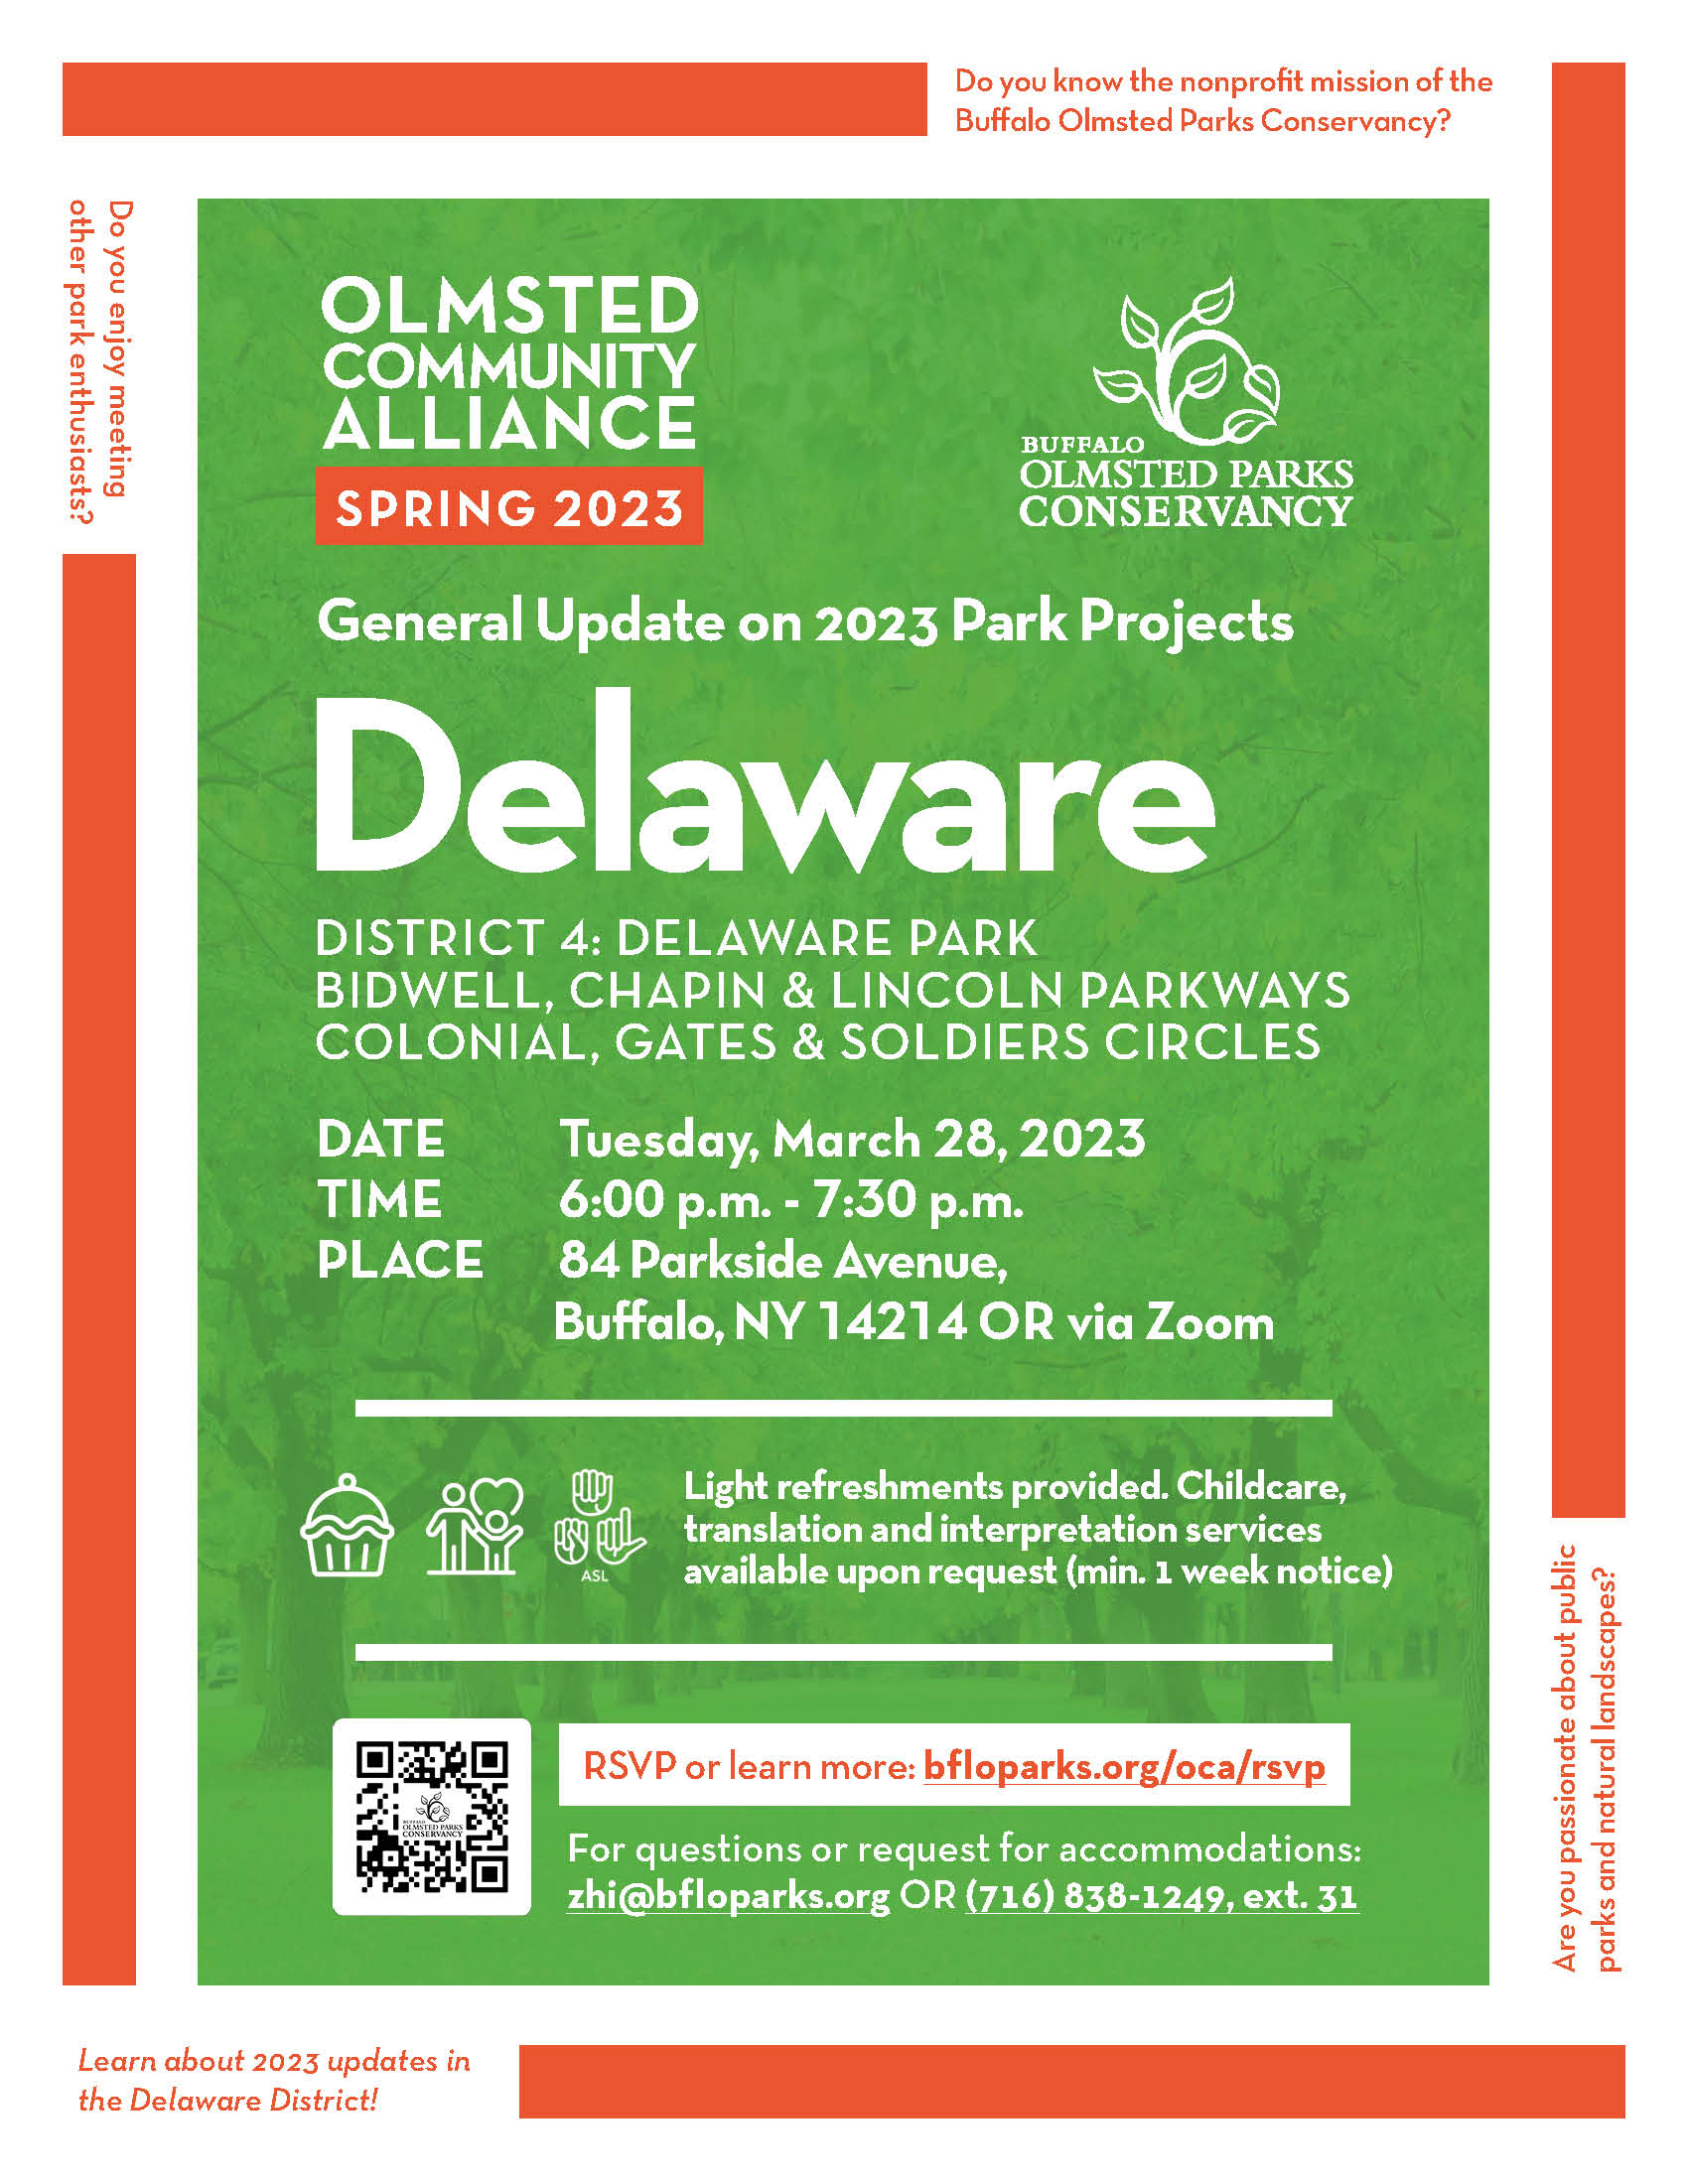 Flyer of the Delaware District Meeting on March 28, 2023